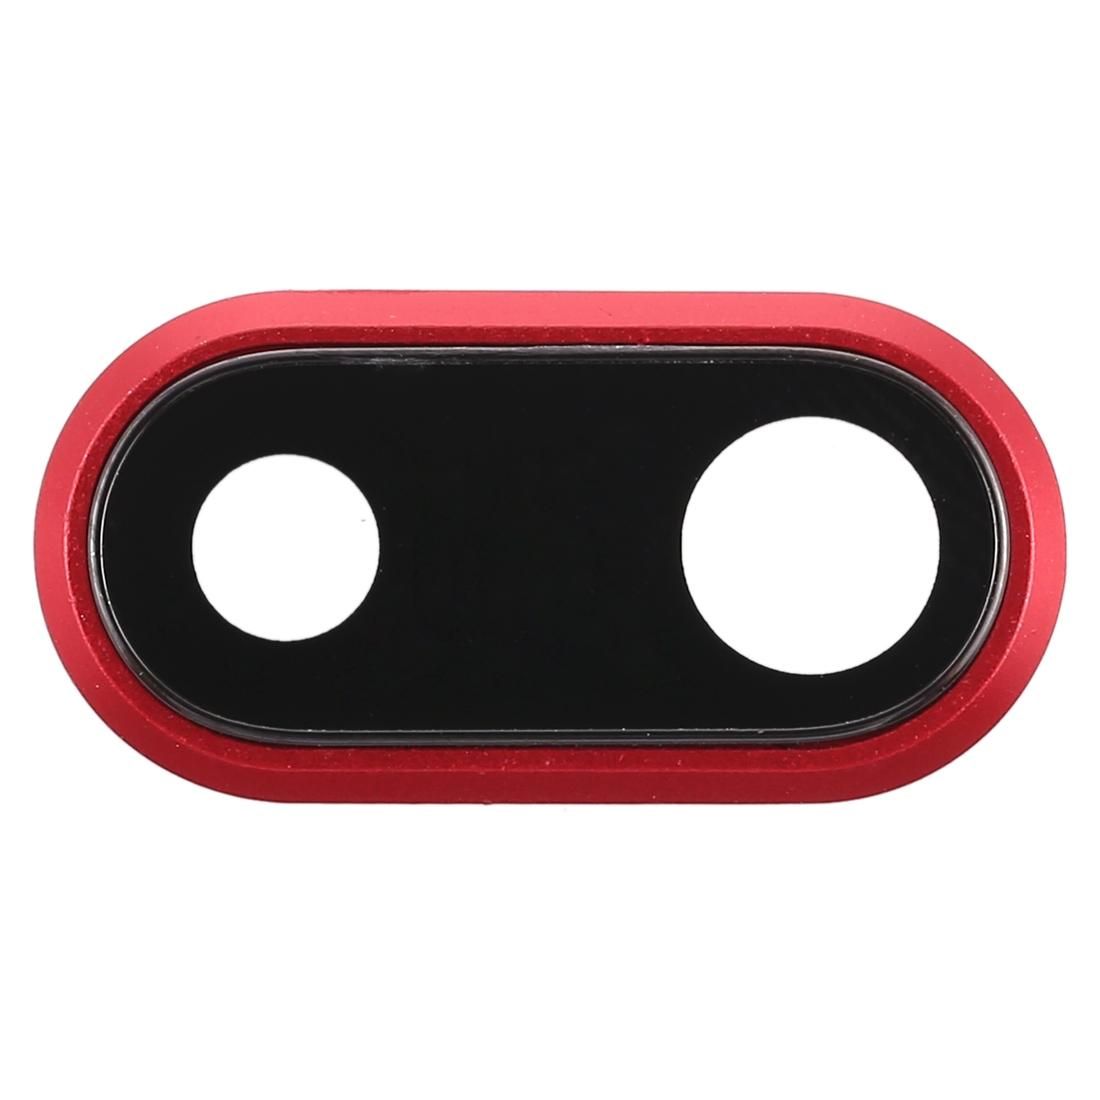 Back Camera Bezel with Lens Cover for iPhone 8 Plus (Red)